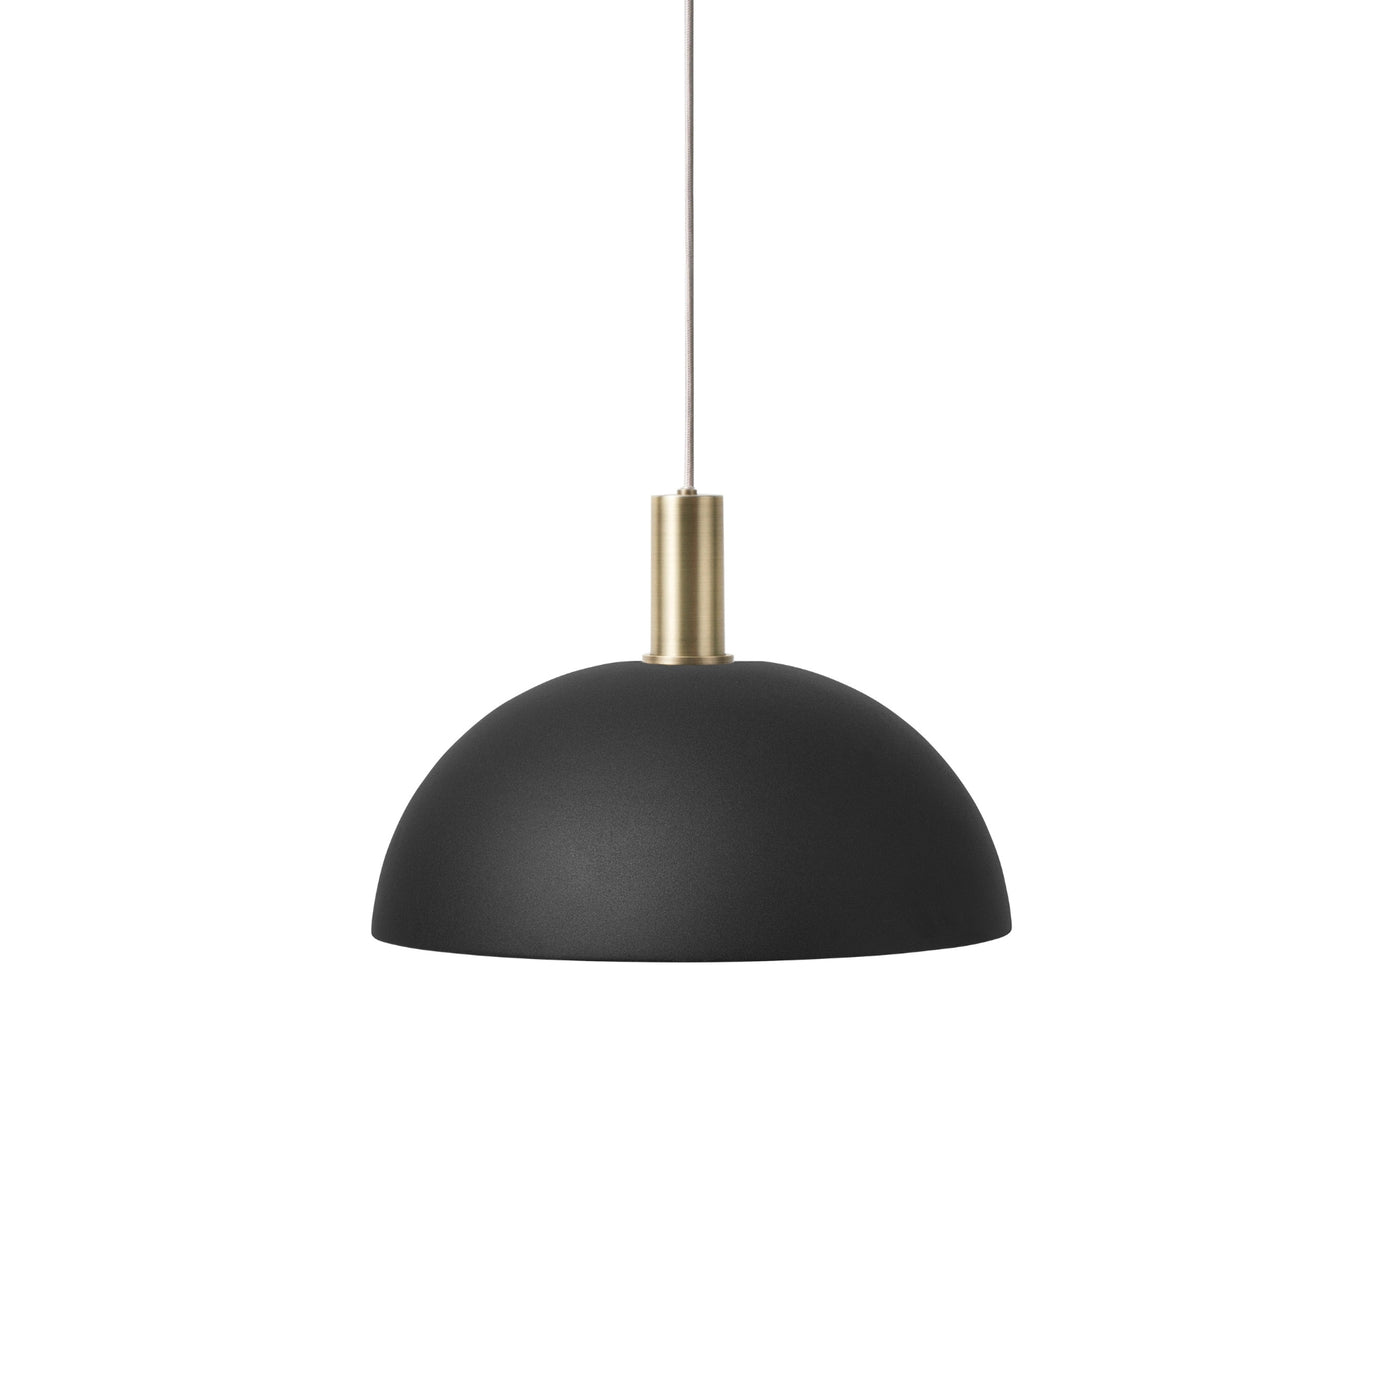 ferm LIVING Collect Lighting Dome Shade. Shop online at someday designs. #colour_black